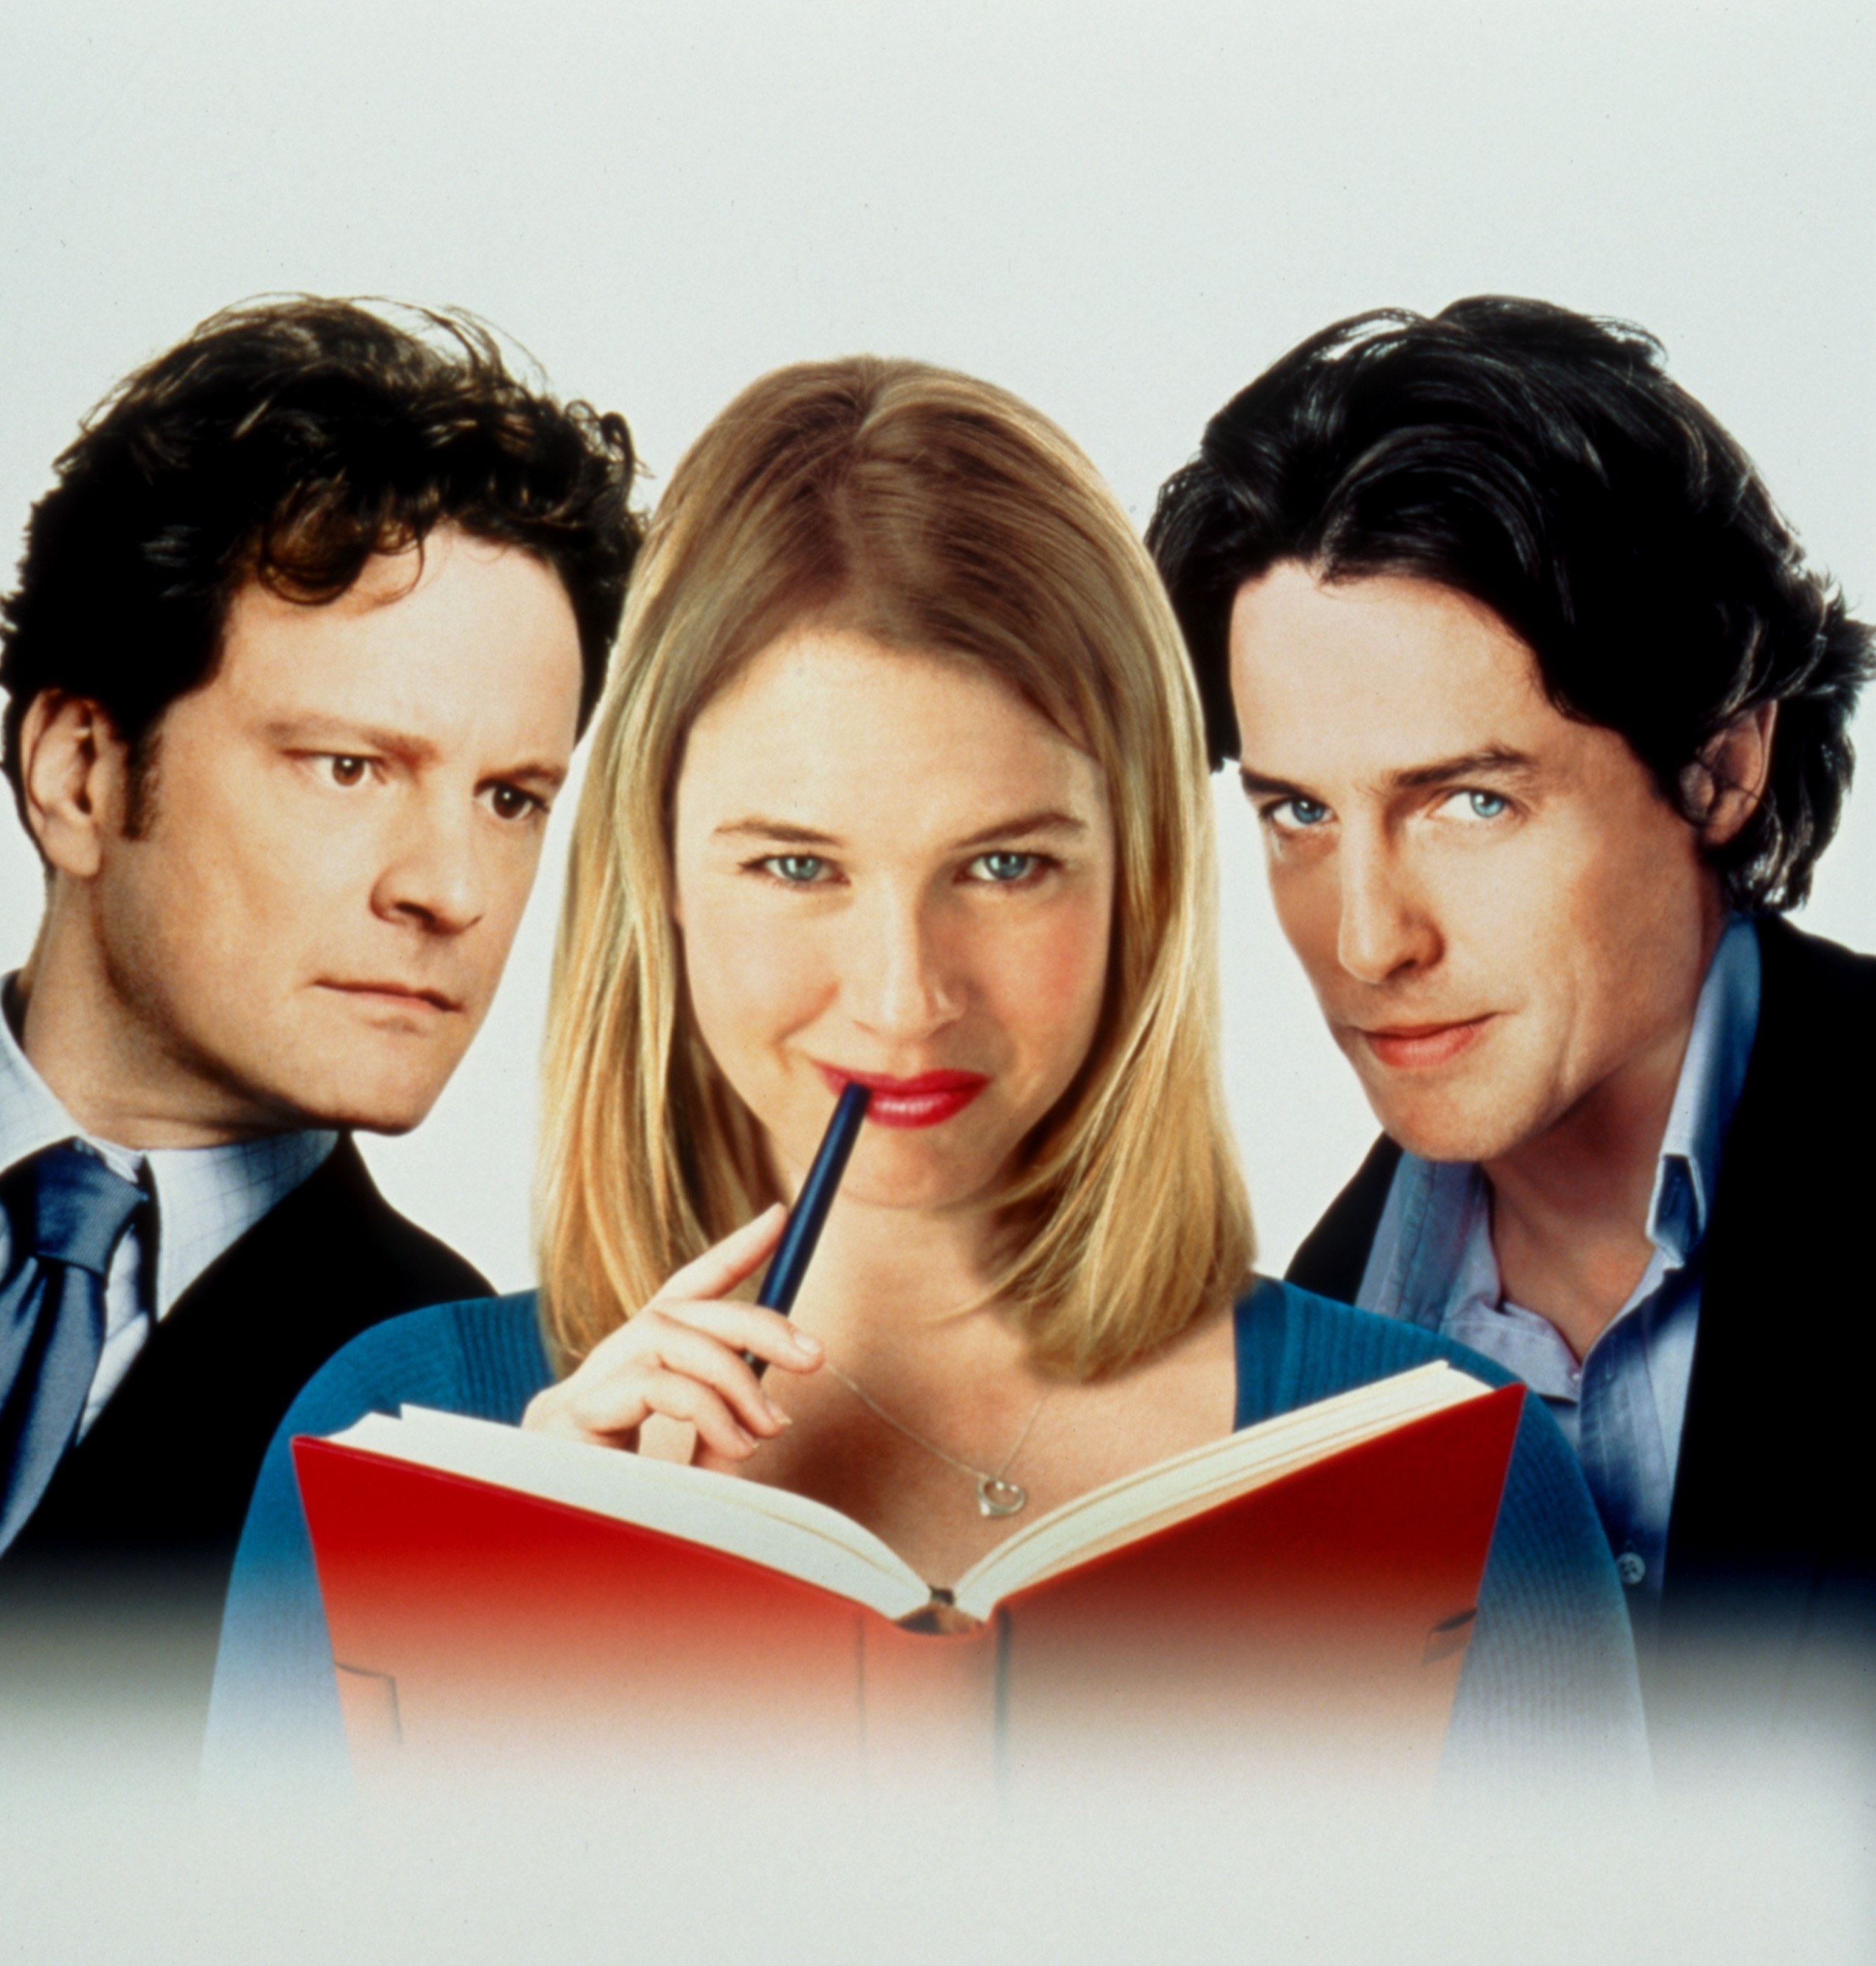 Poster for the film with Colin Firth, Renée Zellweger, and Hugh Grant